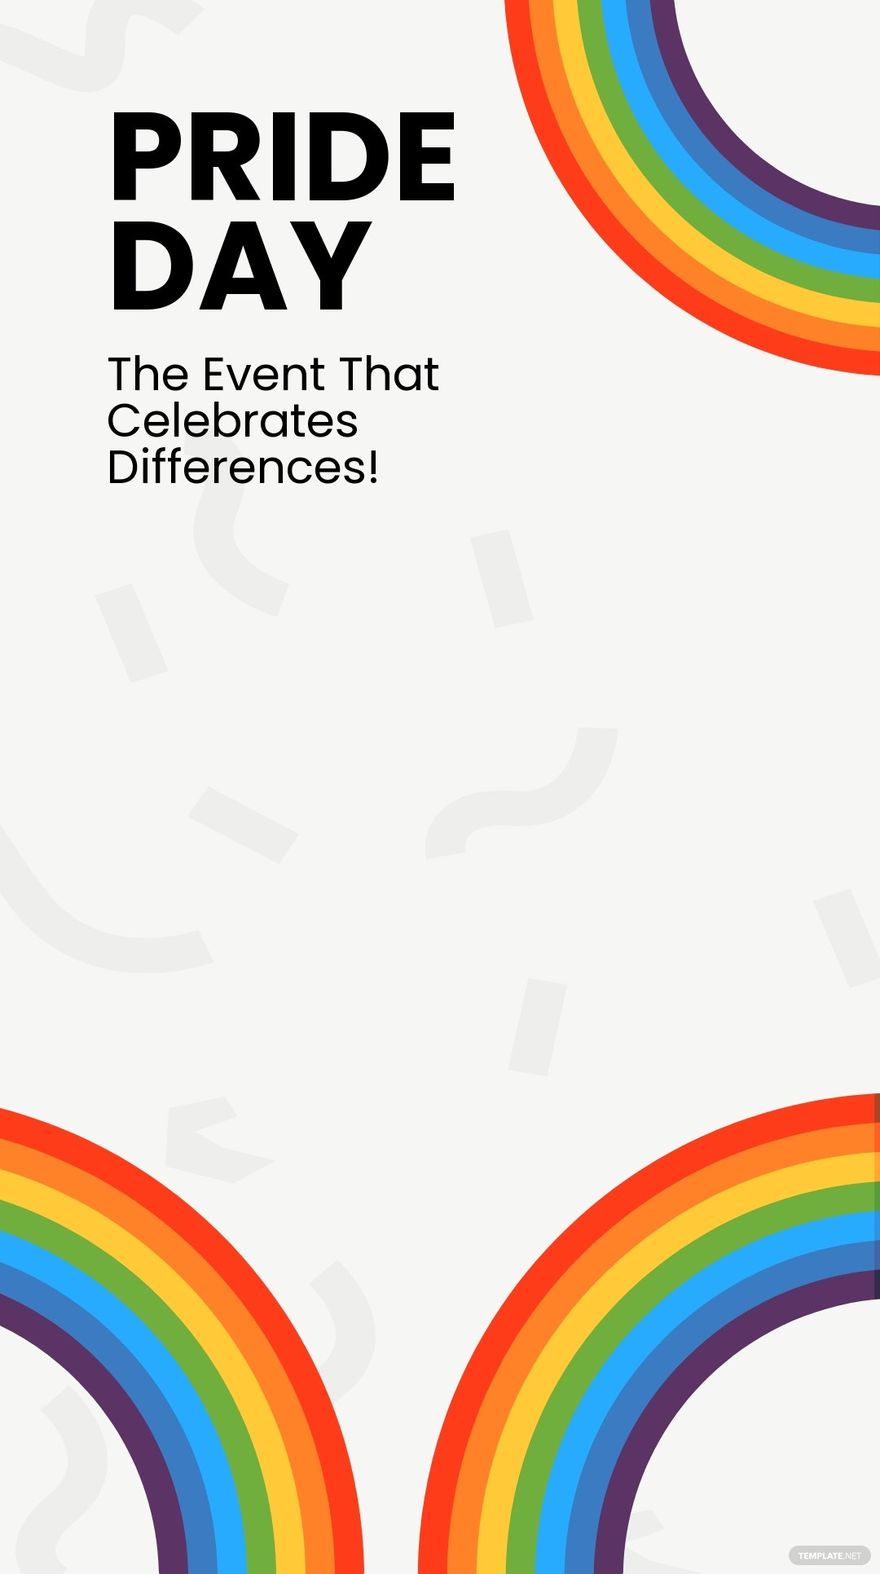 Free Pride Day Event Snapchat Geofilter Template - Download in PNG, JPG ...